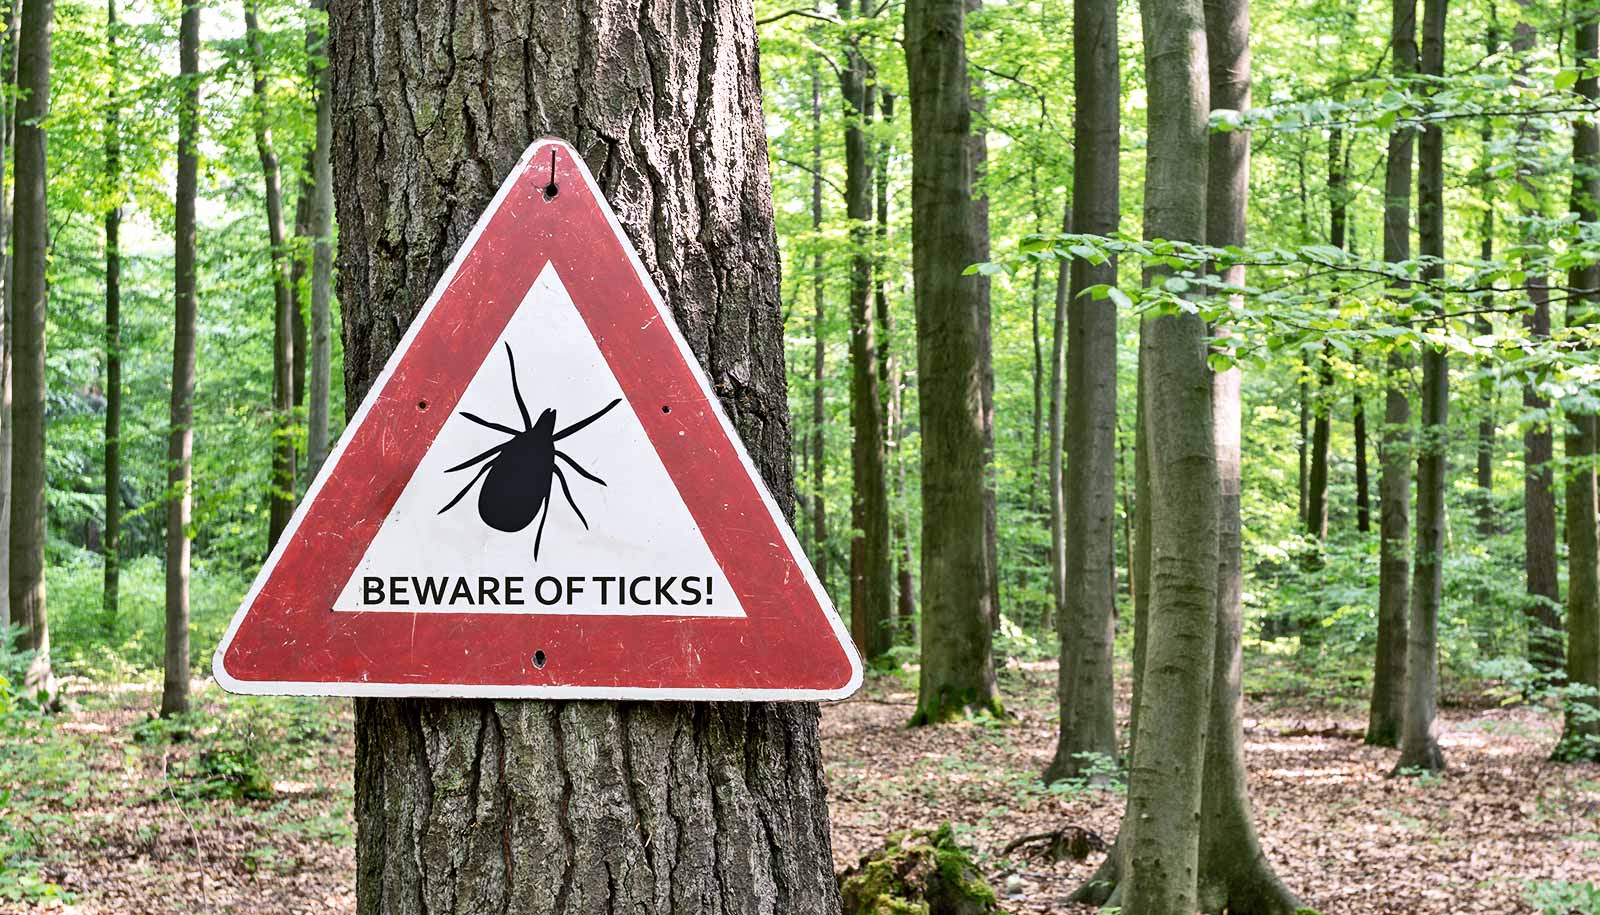 New tests offer faster Lyme disease detection - Futurity